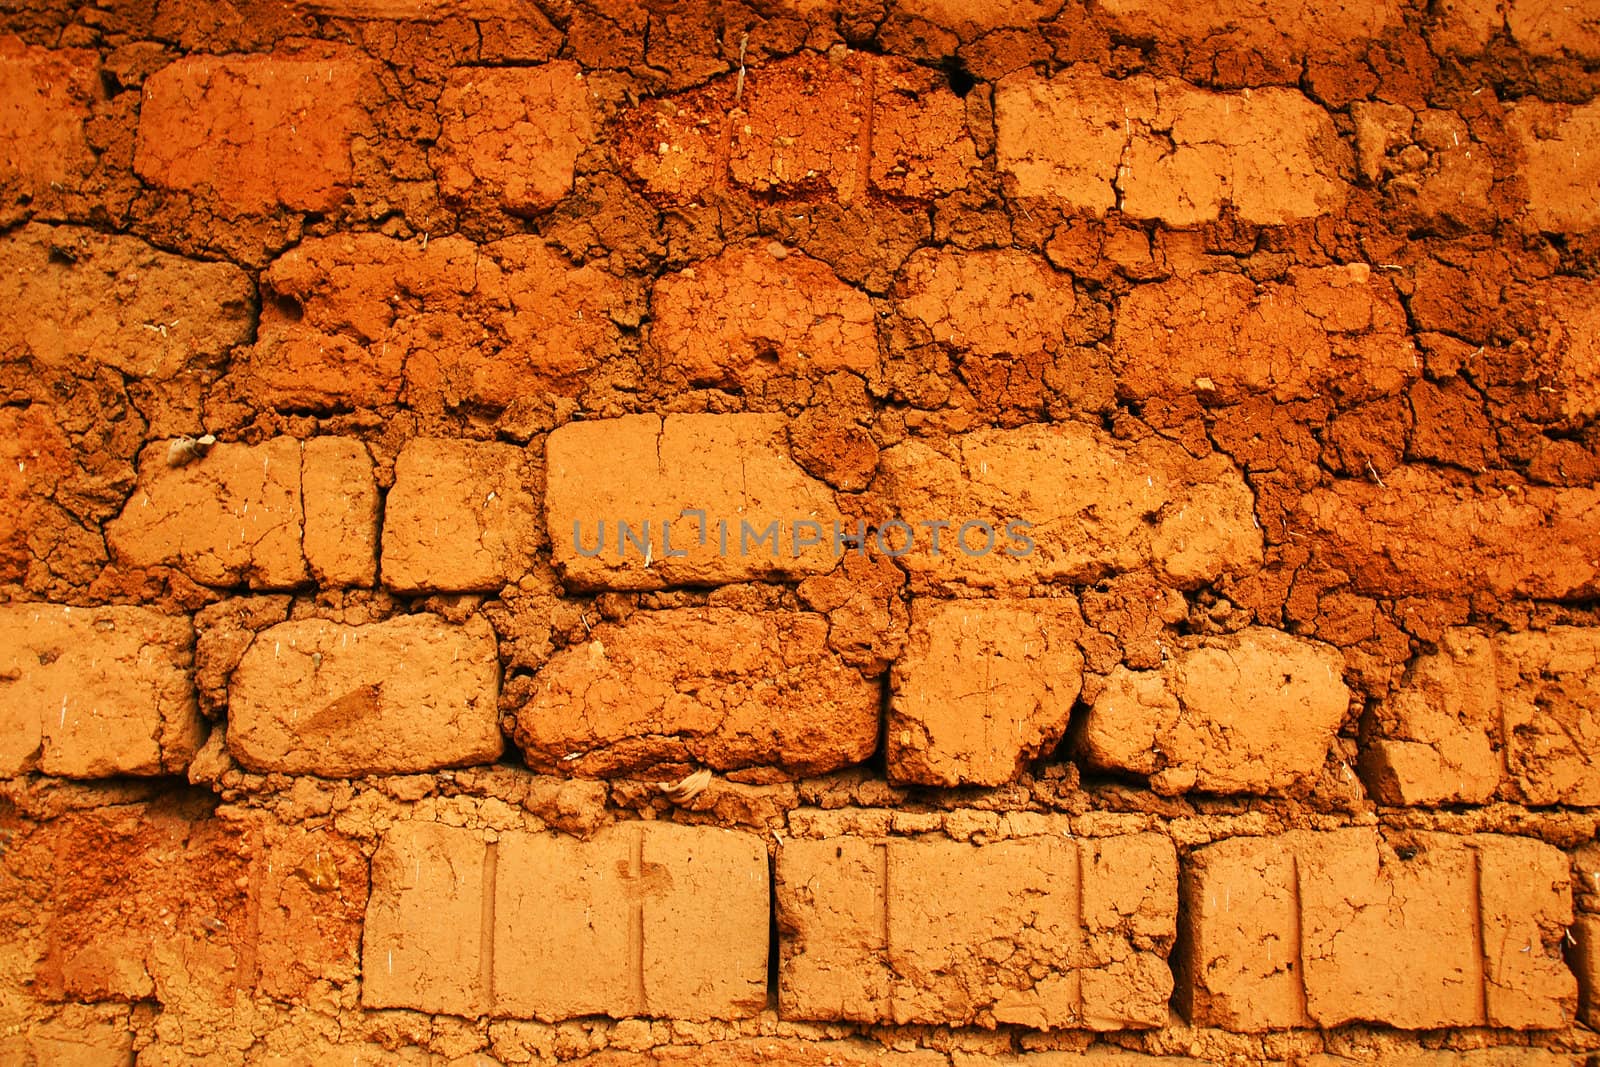 Wall of a house in red clay, earth or soil bricks, great texture background, poverty, developing or tropical country concept.